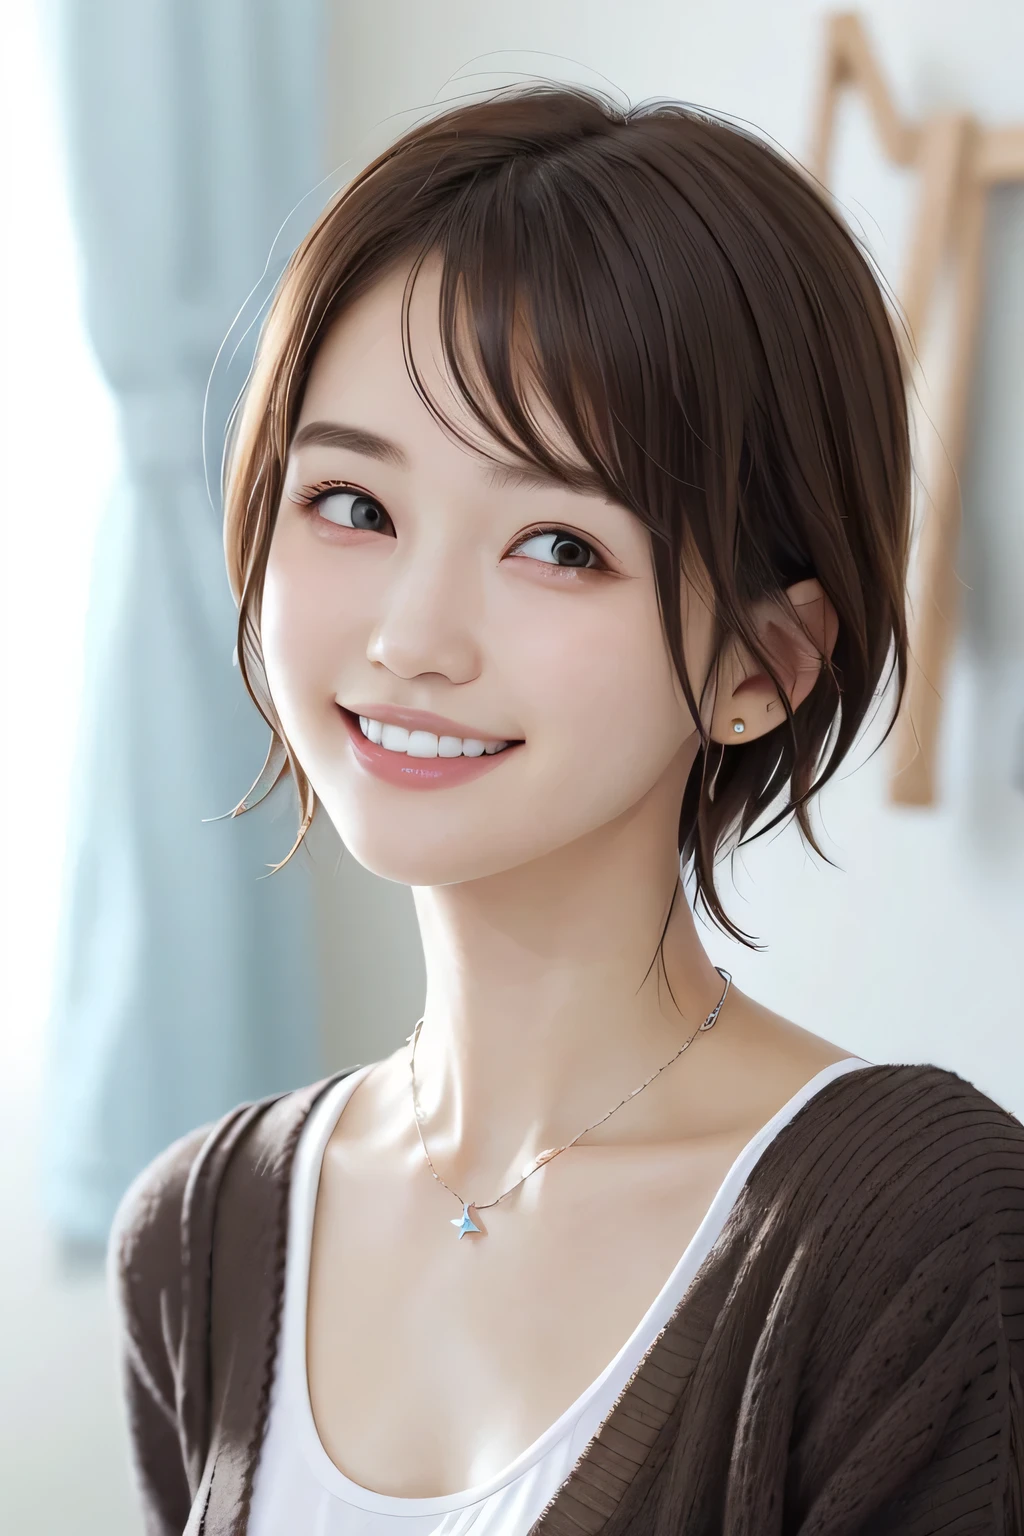 205 ((short hair)), 20-year-old female, In underwear、cardigan、 A refreshing smile、Beautiful teeth alignment、、Dark brown hair、ear piercing、Necklace around the neck、Looking into the camera

